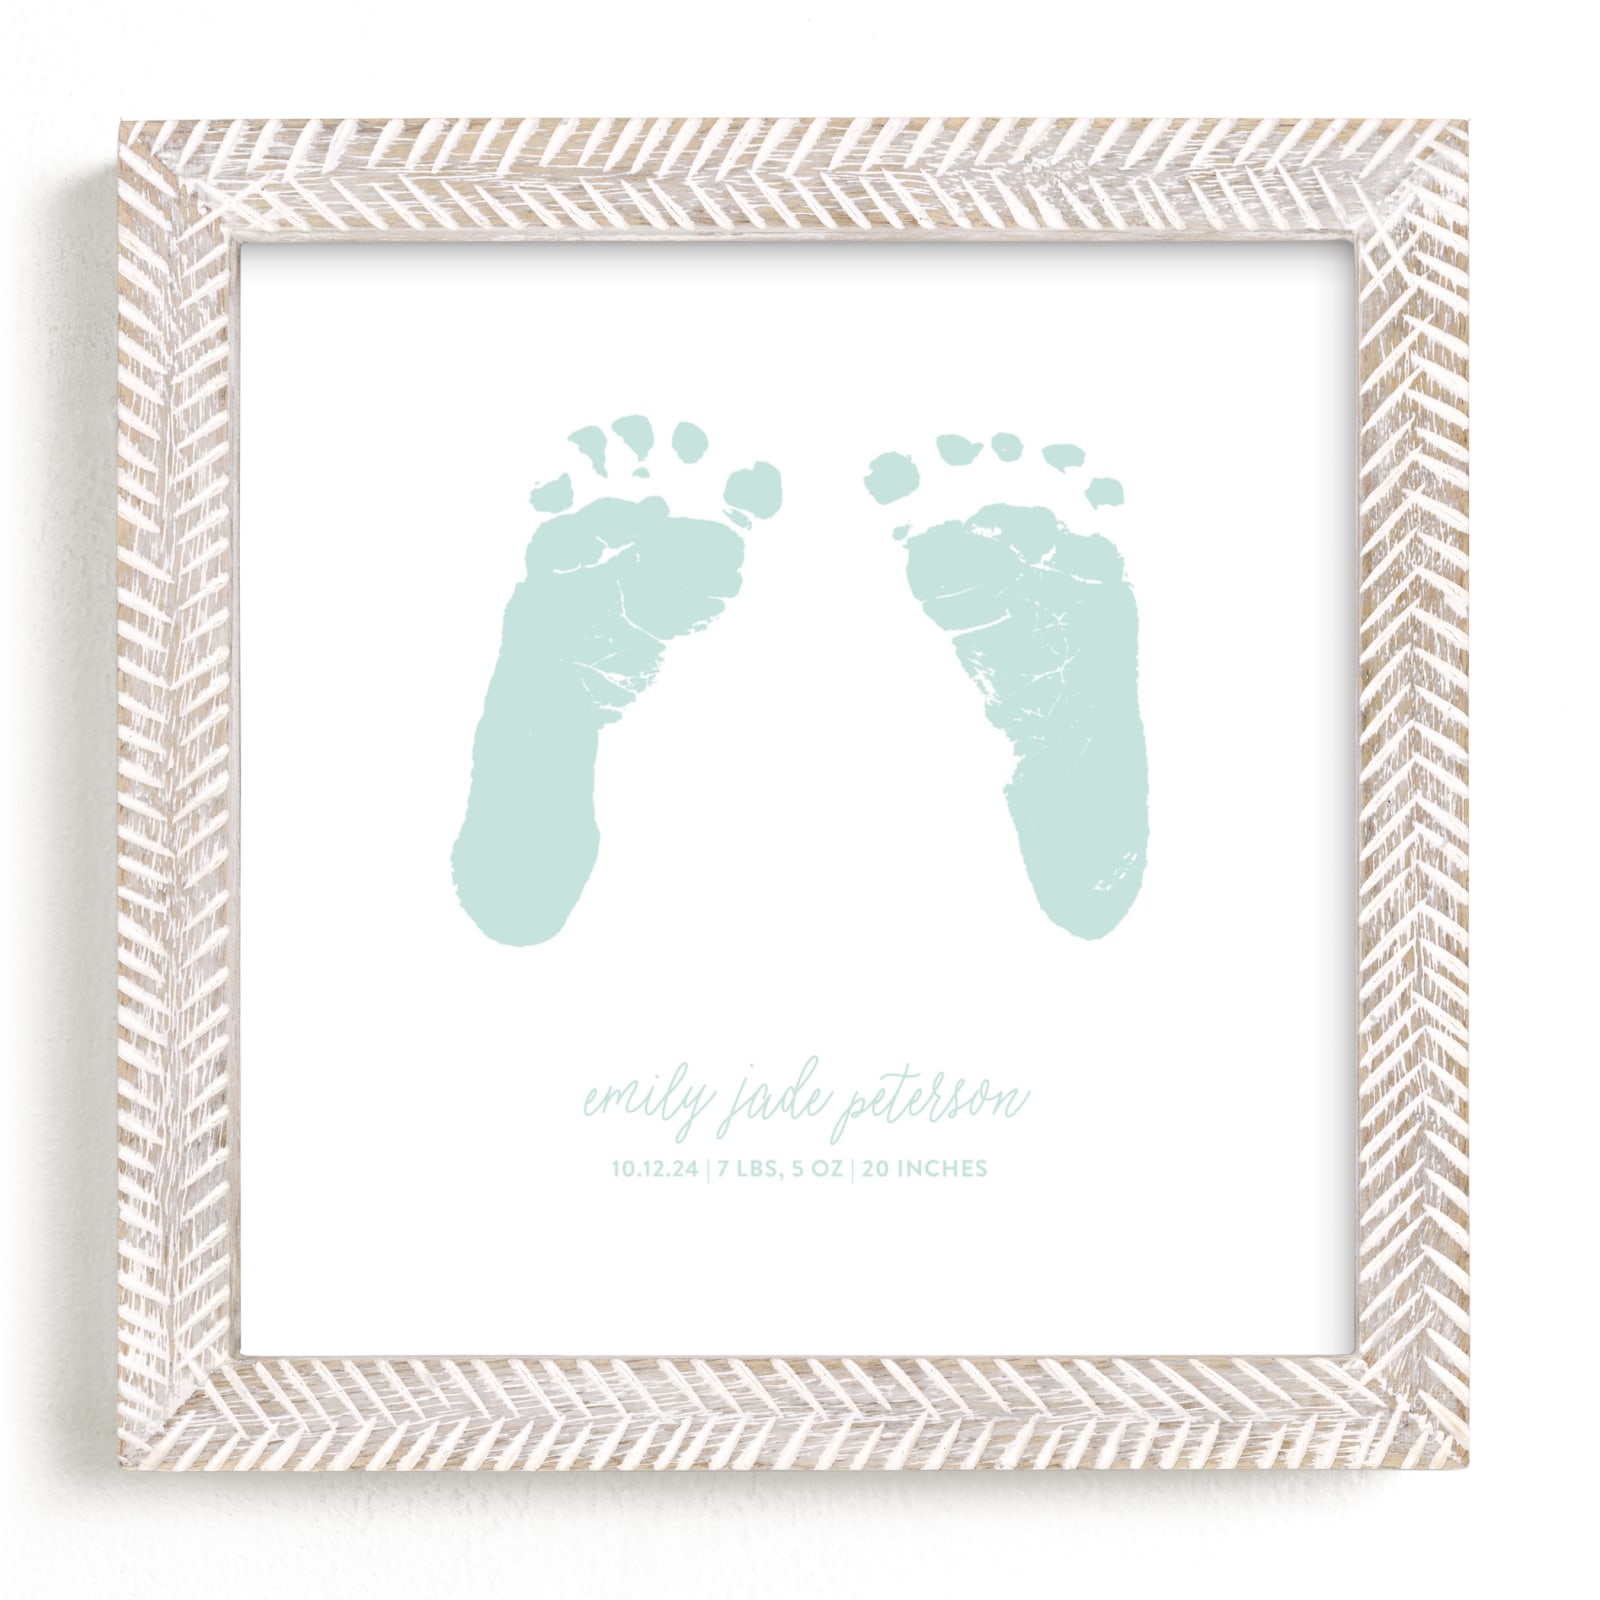 This is a green photos to art by Minted Custom called Custom Footprints Letterpress Art.